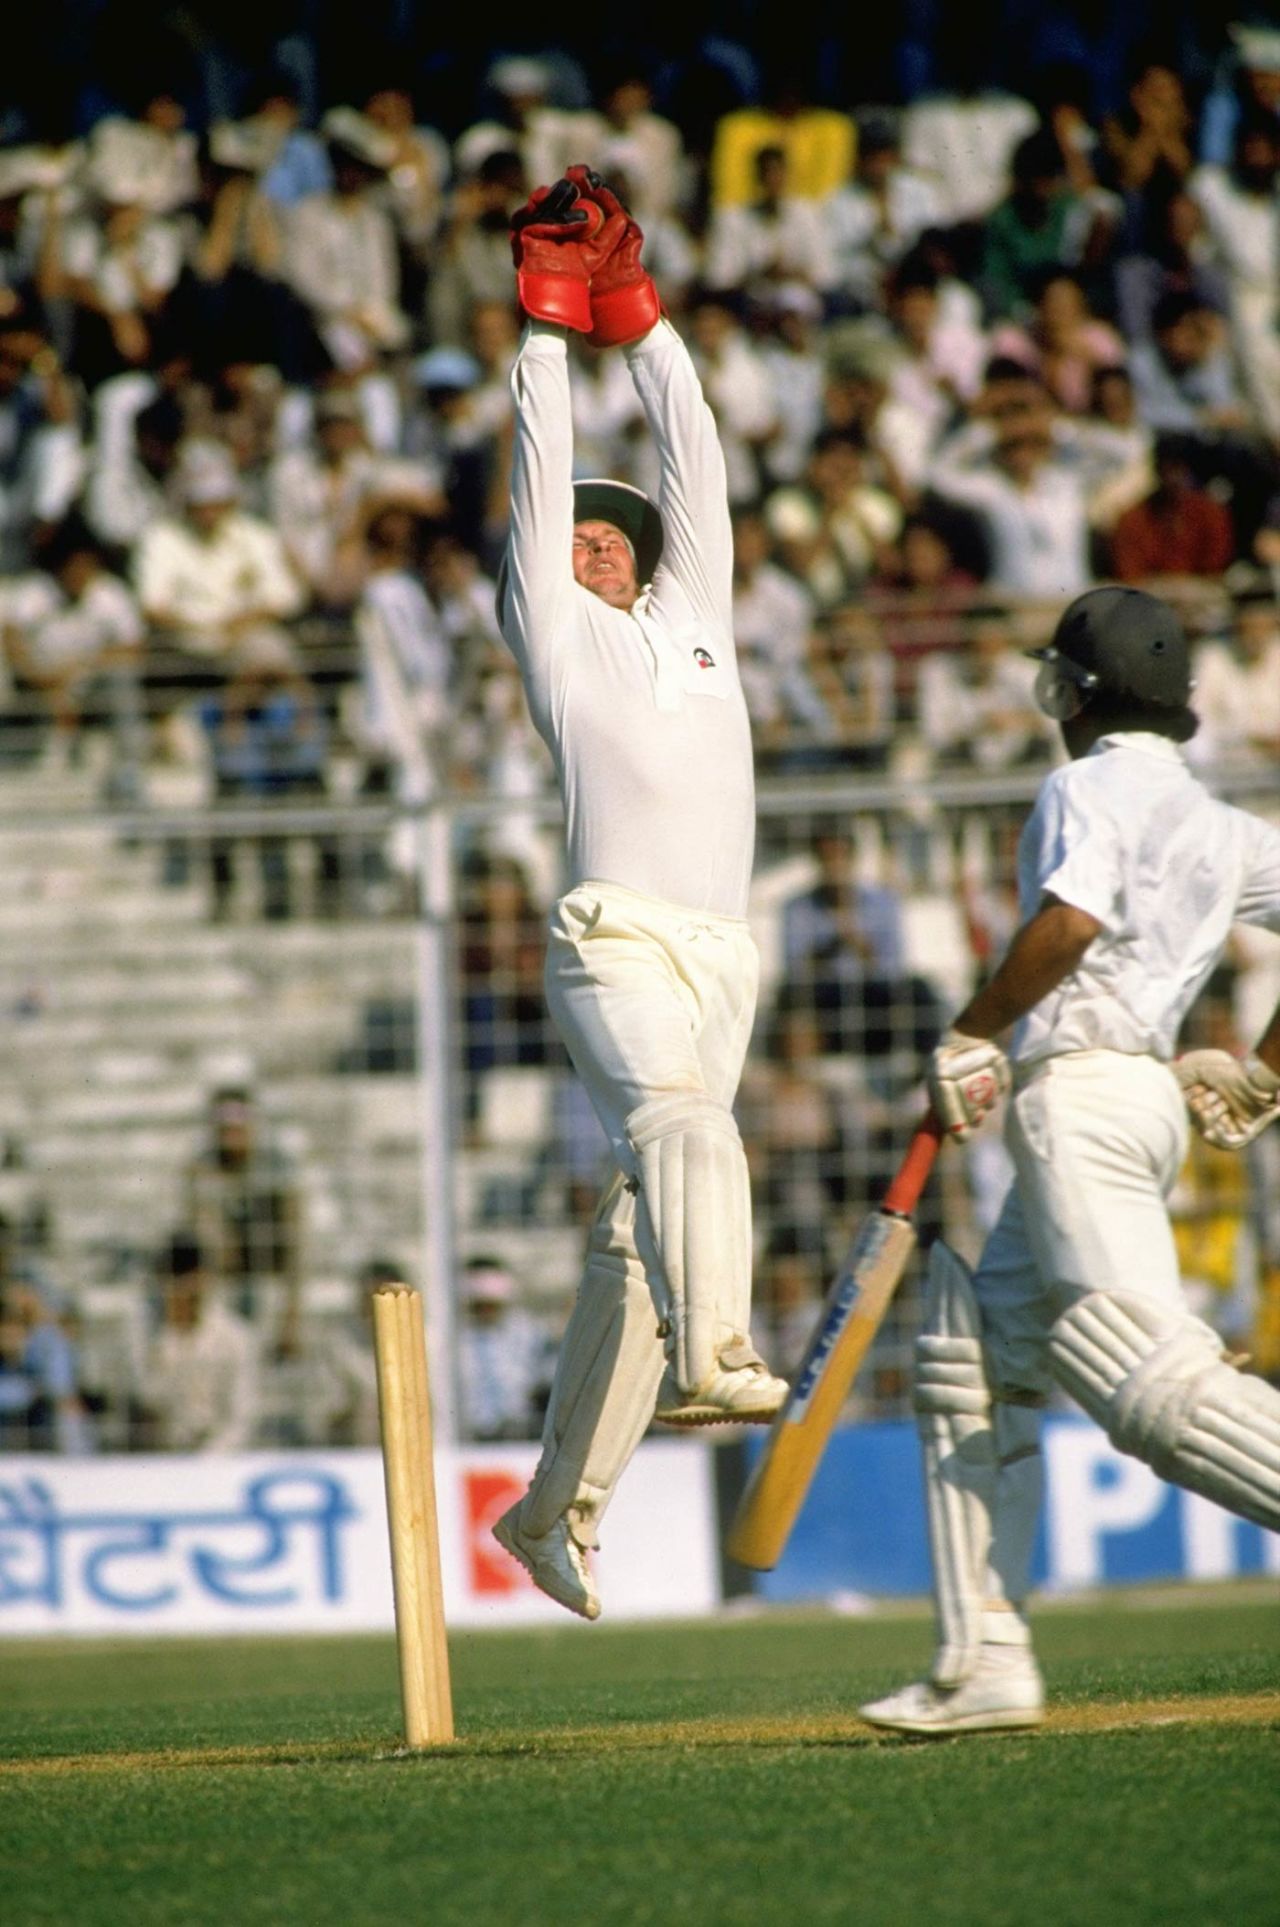 Ian Smith leaps to catch the ball, India v New Zealand, second test, day five, Bombay, November 29, 1988